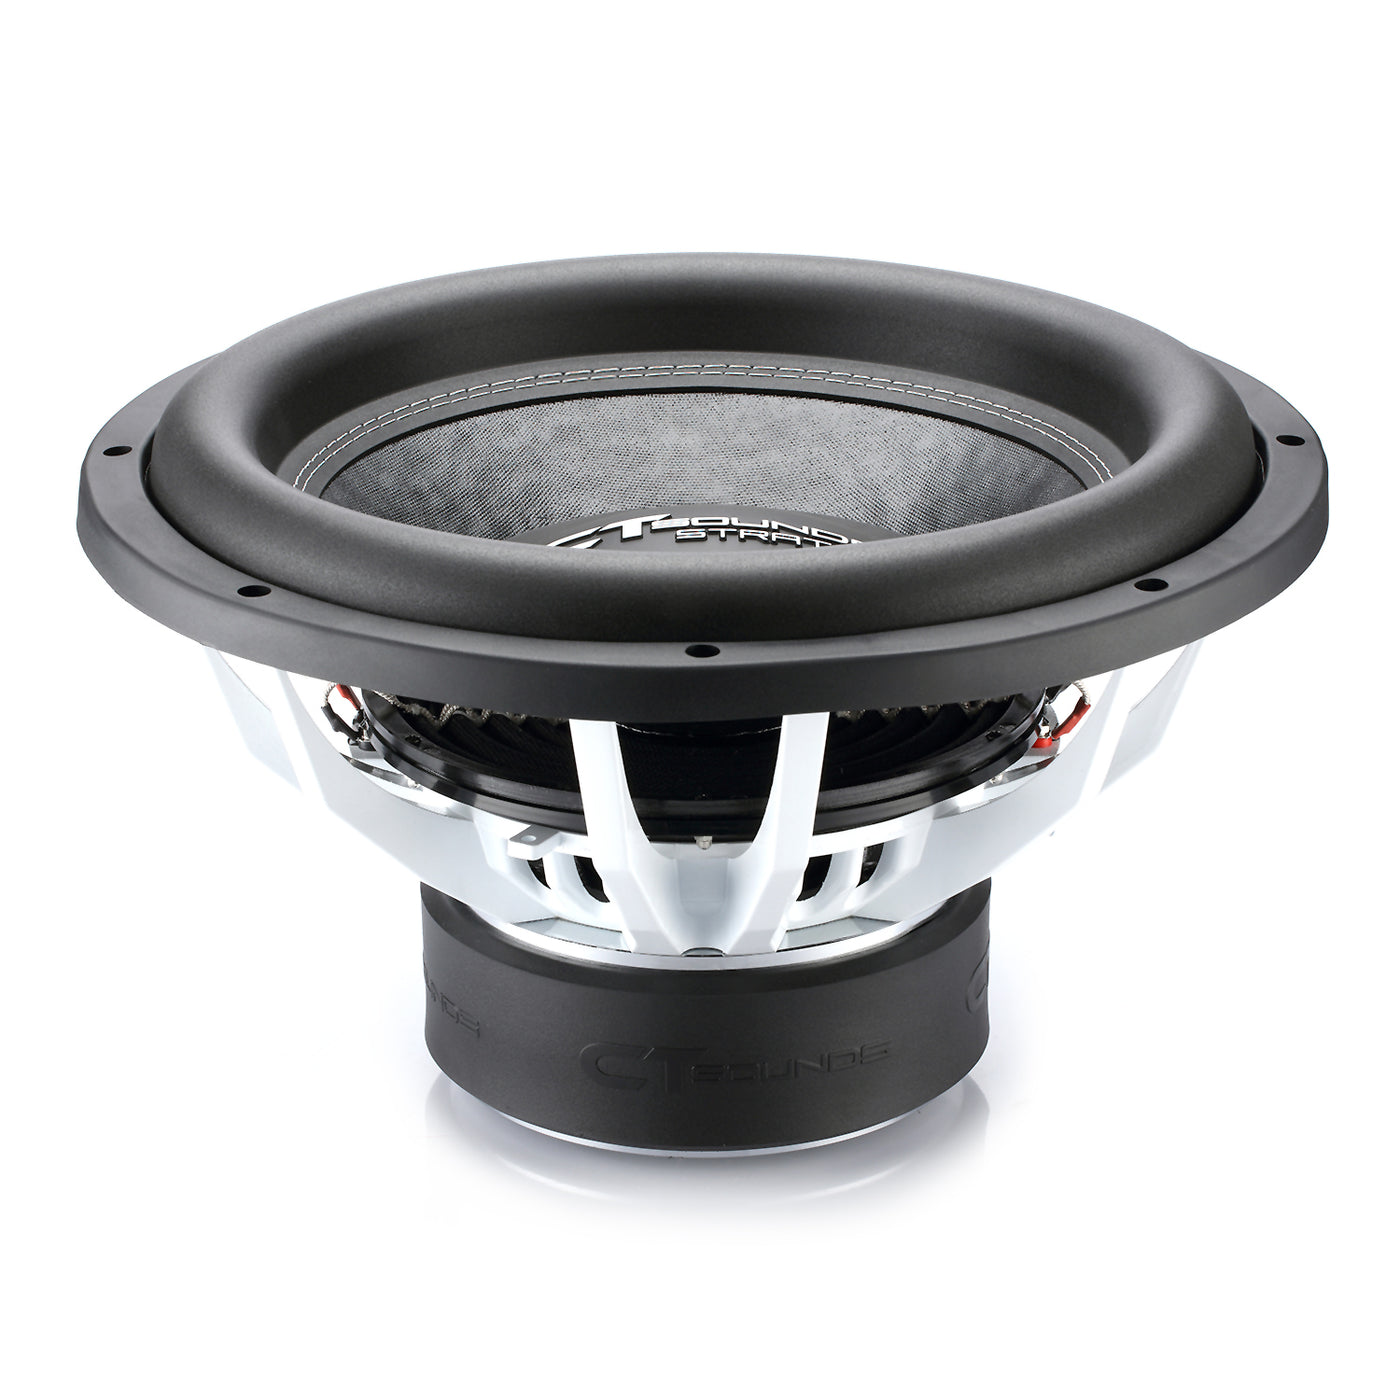 STRATO-15-D2 // 1250 Watts RMS 15 Inch Car Subwoofer - CT SOUNDS